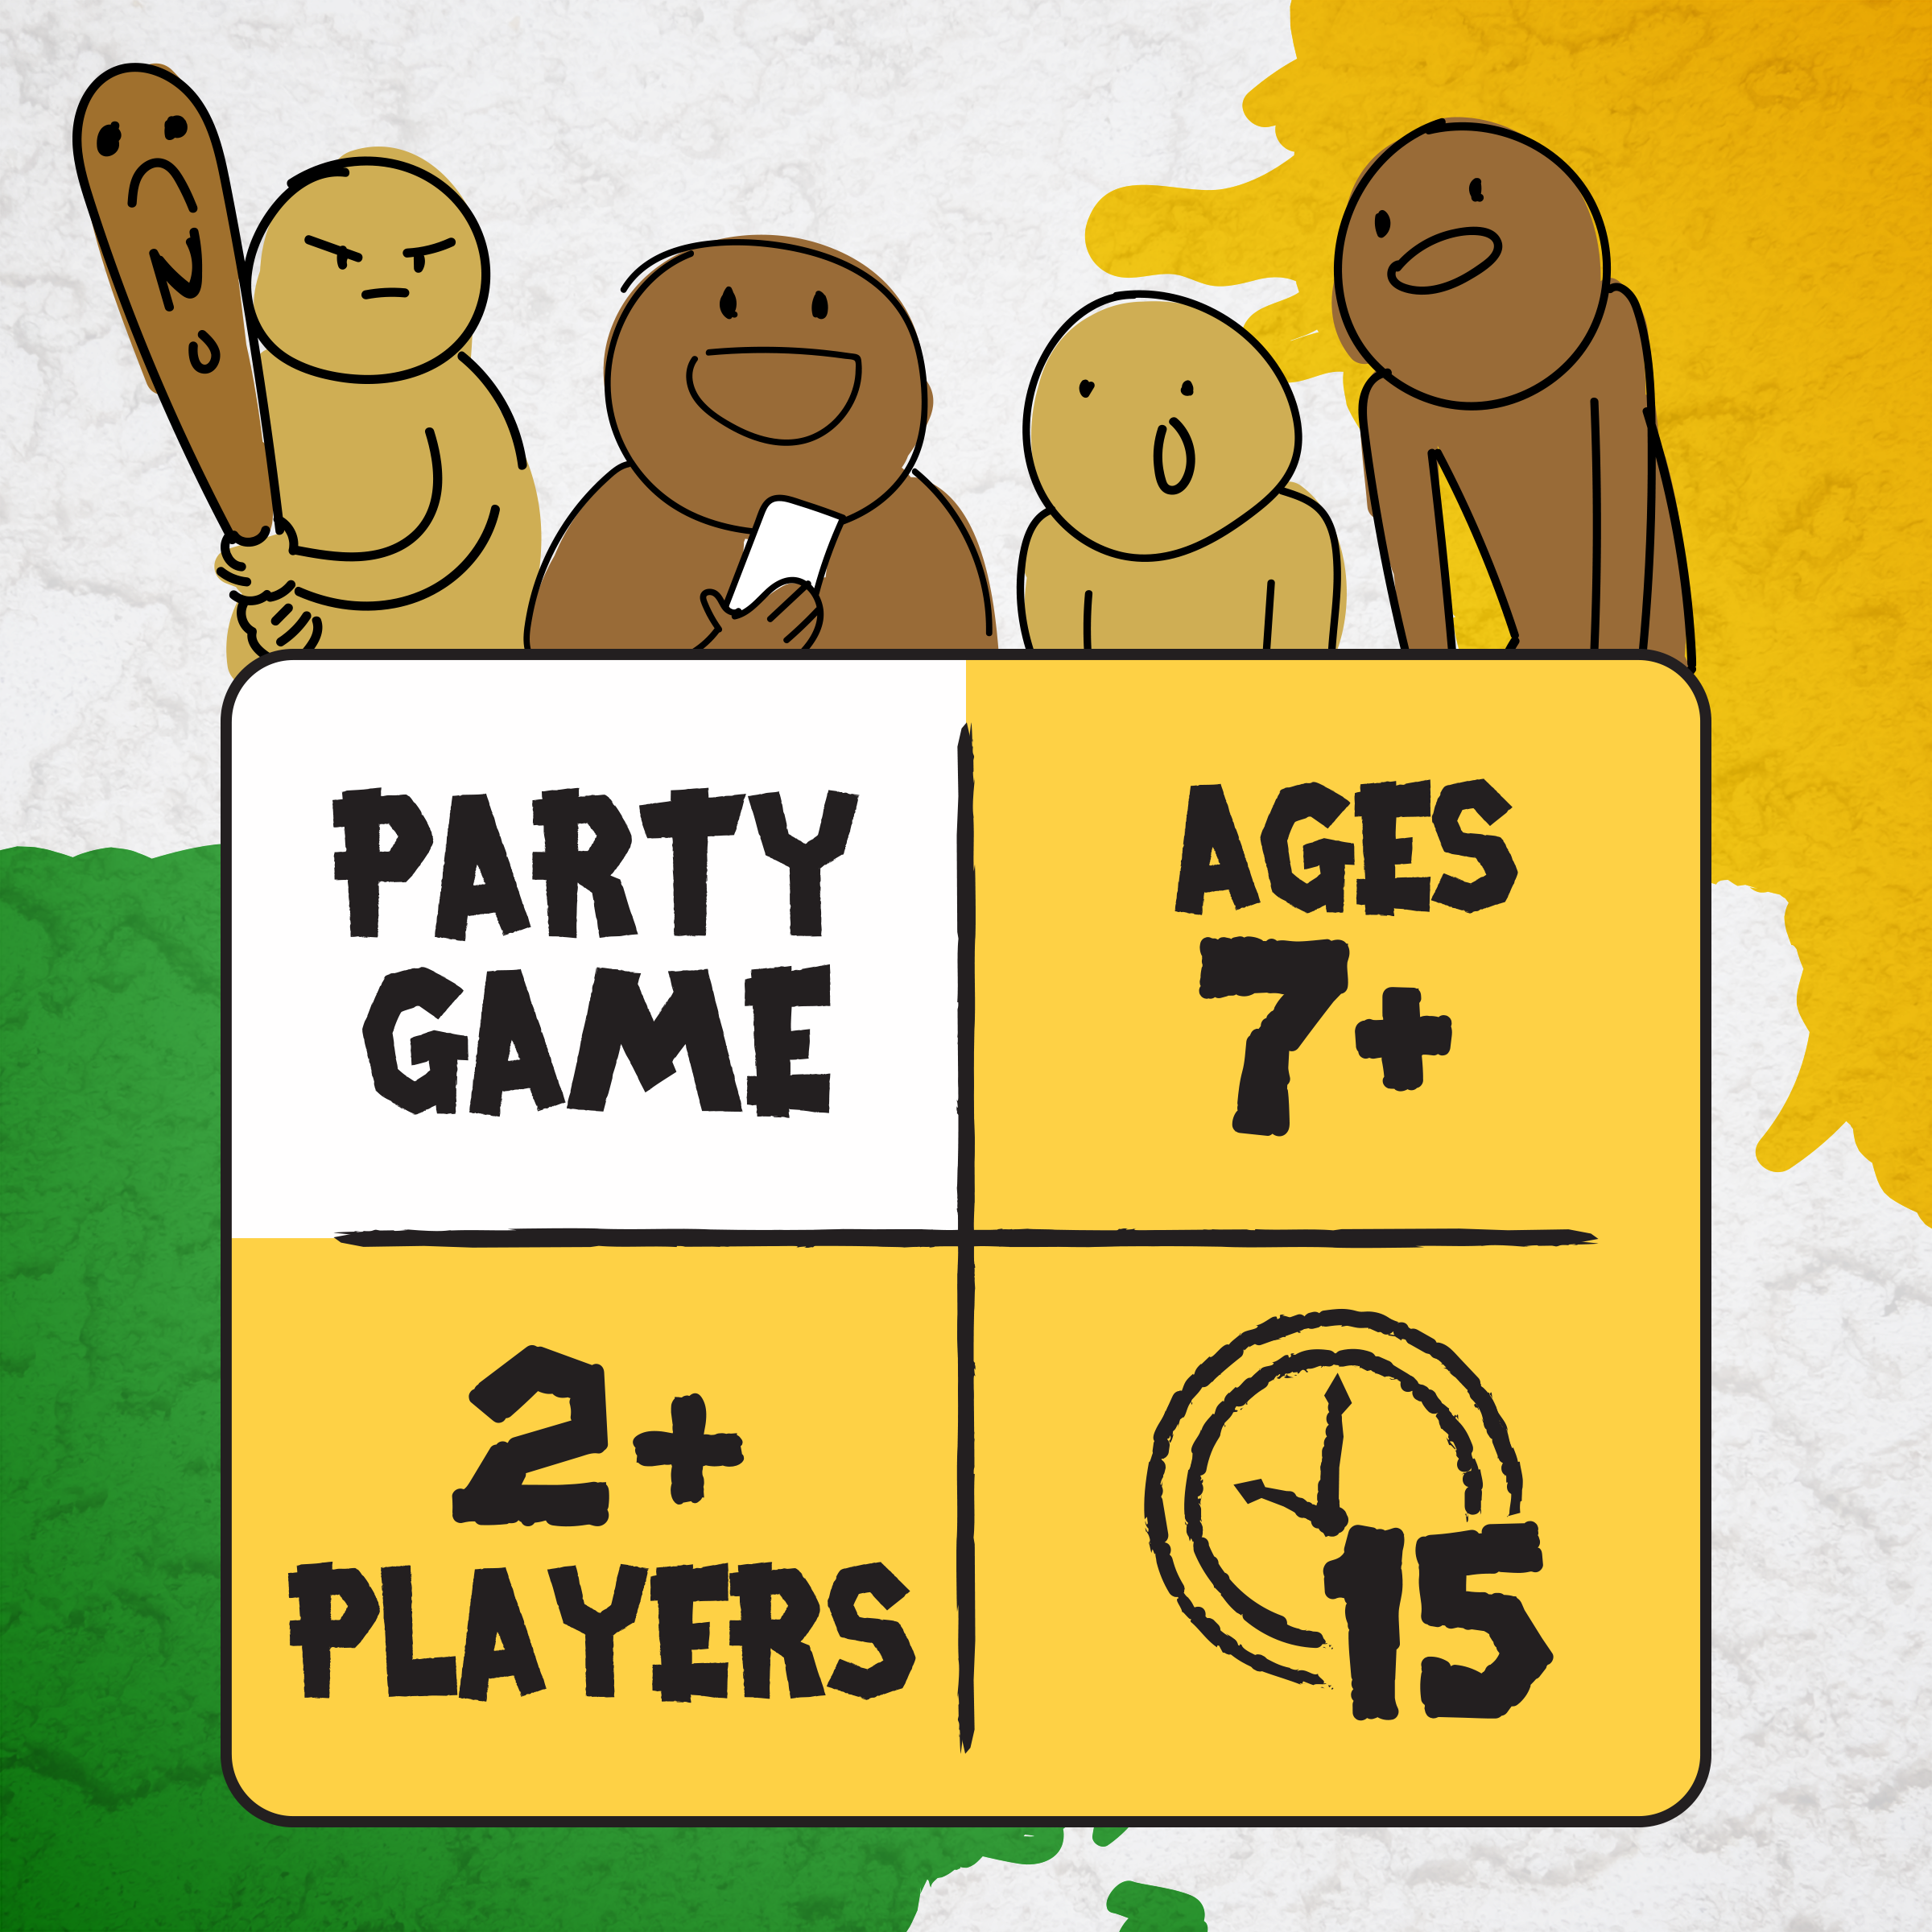 Poetry for Neanderthals Party Game by Exploding Kittens, 15 Minutes, Ages 7 and up, 2+ Players. - image 2 of 5